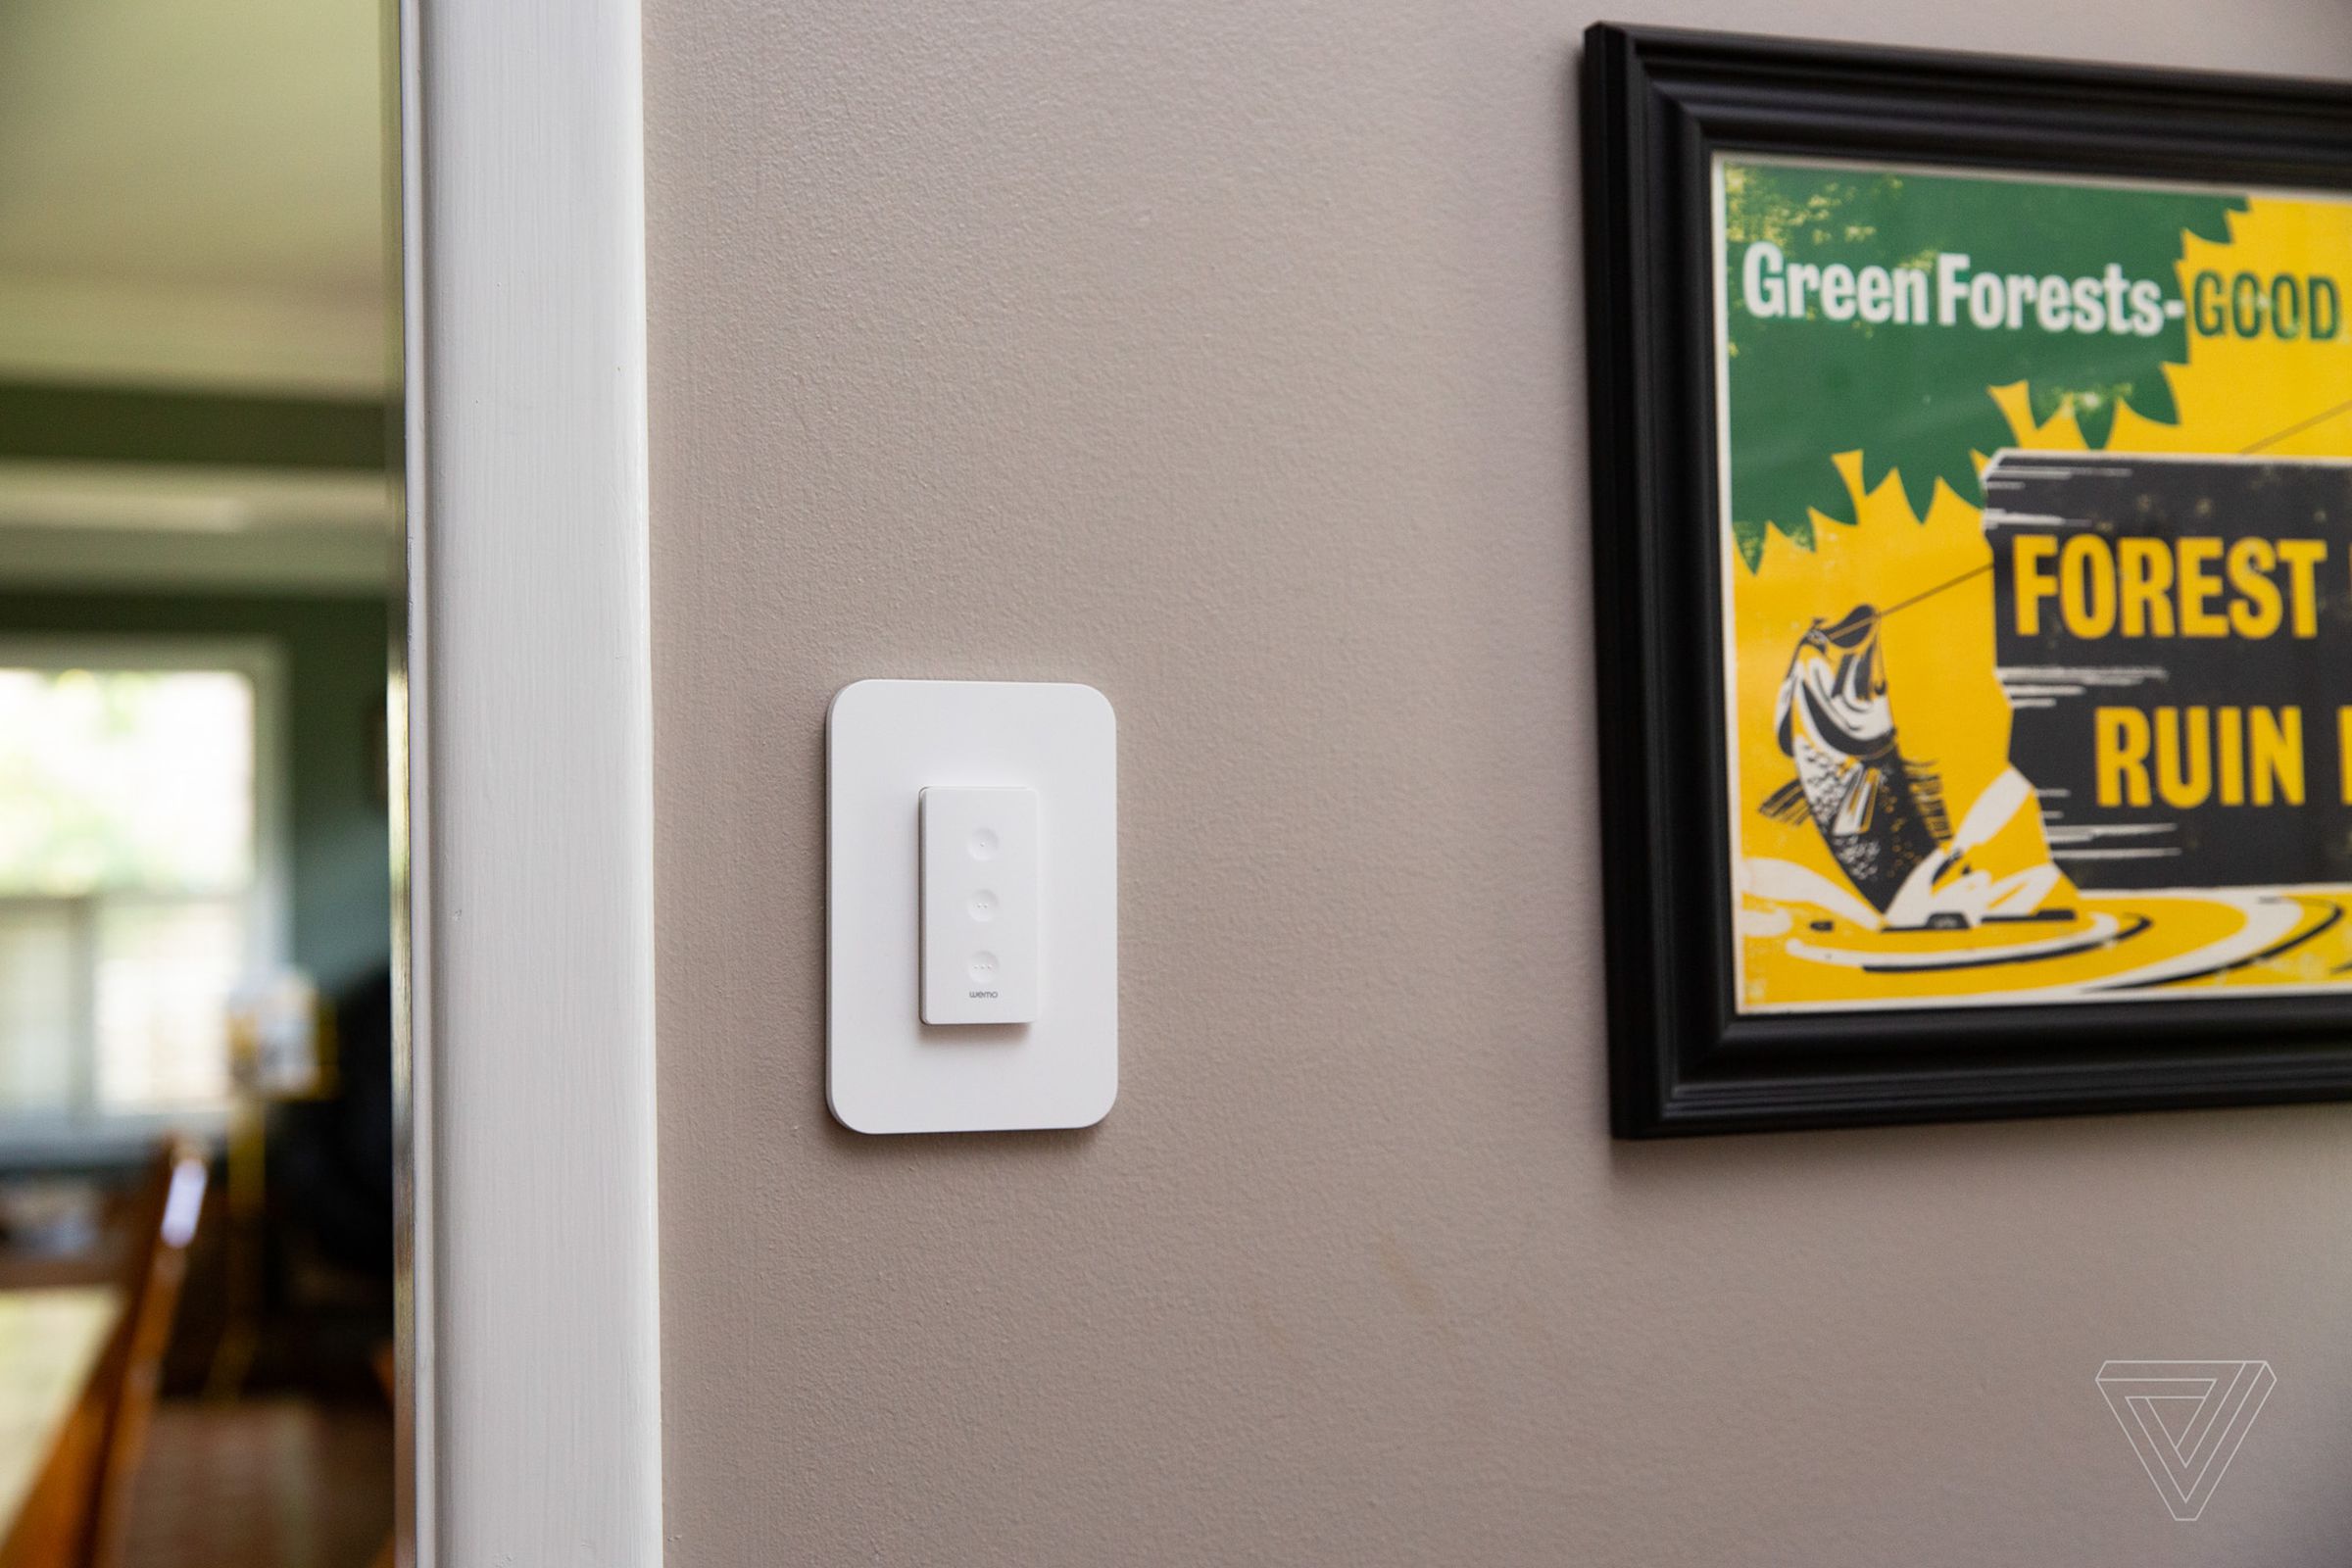 An image of a white light switch with three buttons. It is mounted on a tan wall. Green and yellow artwork in a black frame is also visible.